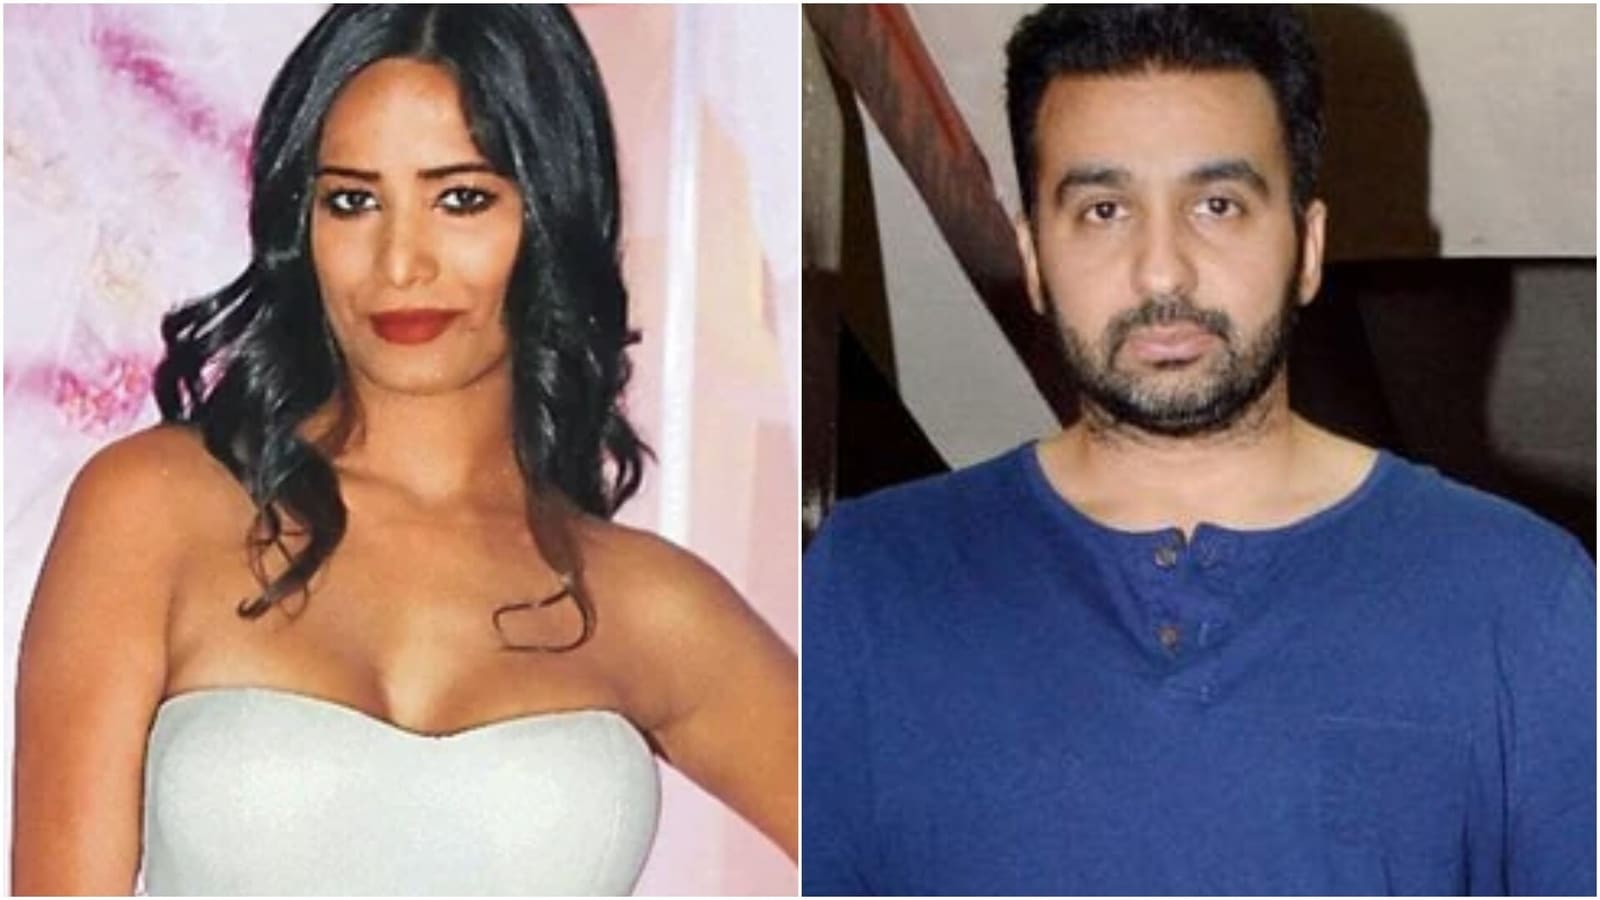 Poonam Madam Sex Vidio - Poonam Pandey says working with Raj Kundra was the 'biggest mistake' of her  life: 'These guys cheat people' | Bollywood - Hindustan Times